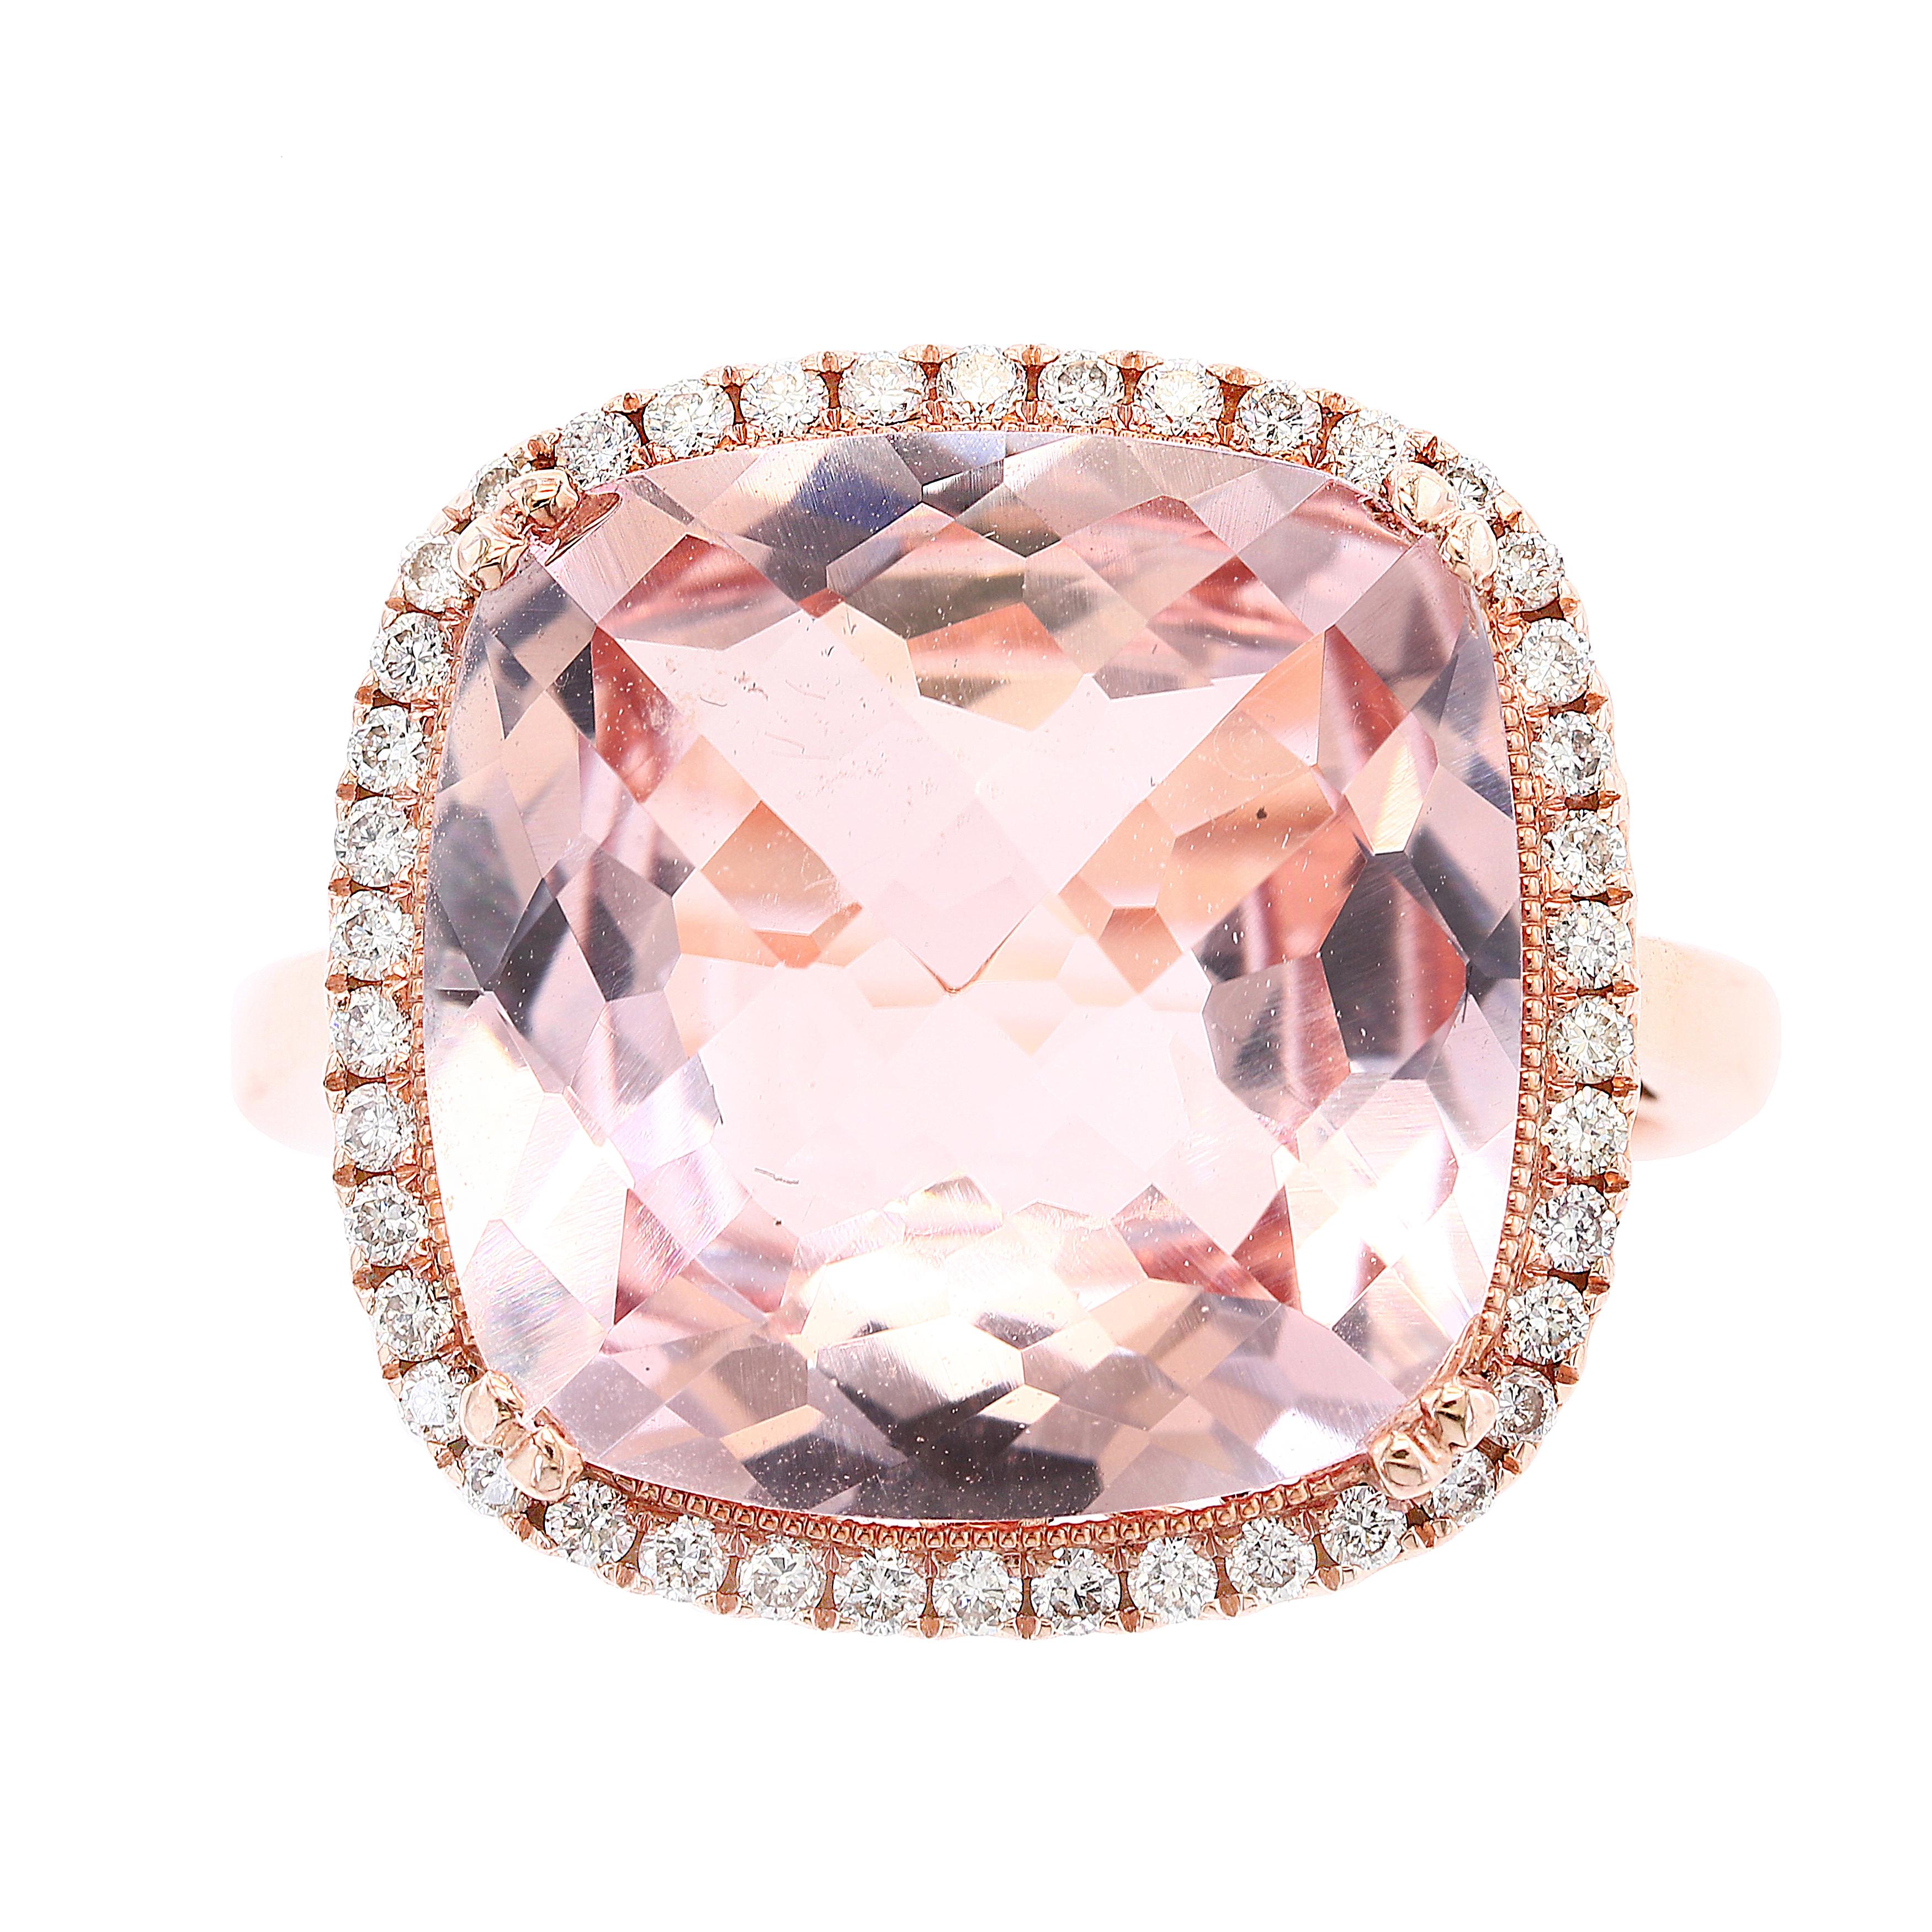 Featuring  5.58 carat Cushion Cut Morganite, surrounded by one row of 52 round brilliant diamonds. Set in a 14K mounting accented with diamonds. Total weight of diamonds is 0.86 carats.

Size 6.5 US (Sizable). One of a Kind  piece.
All diamonds are